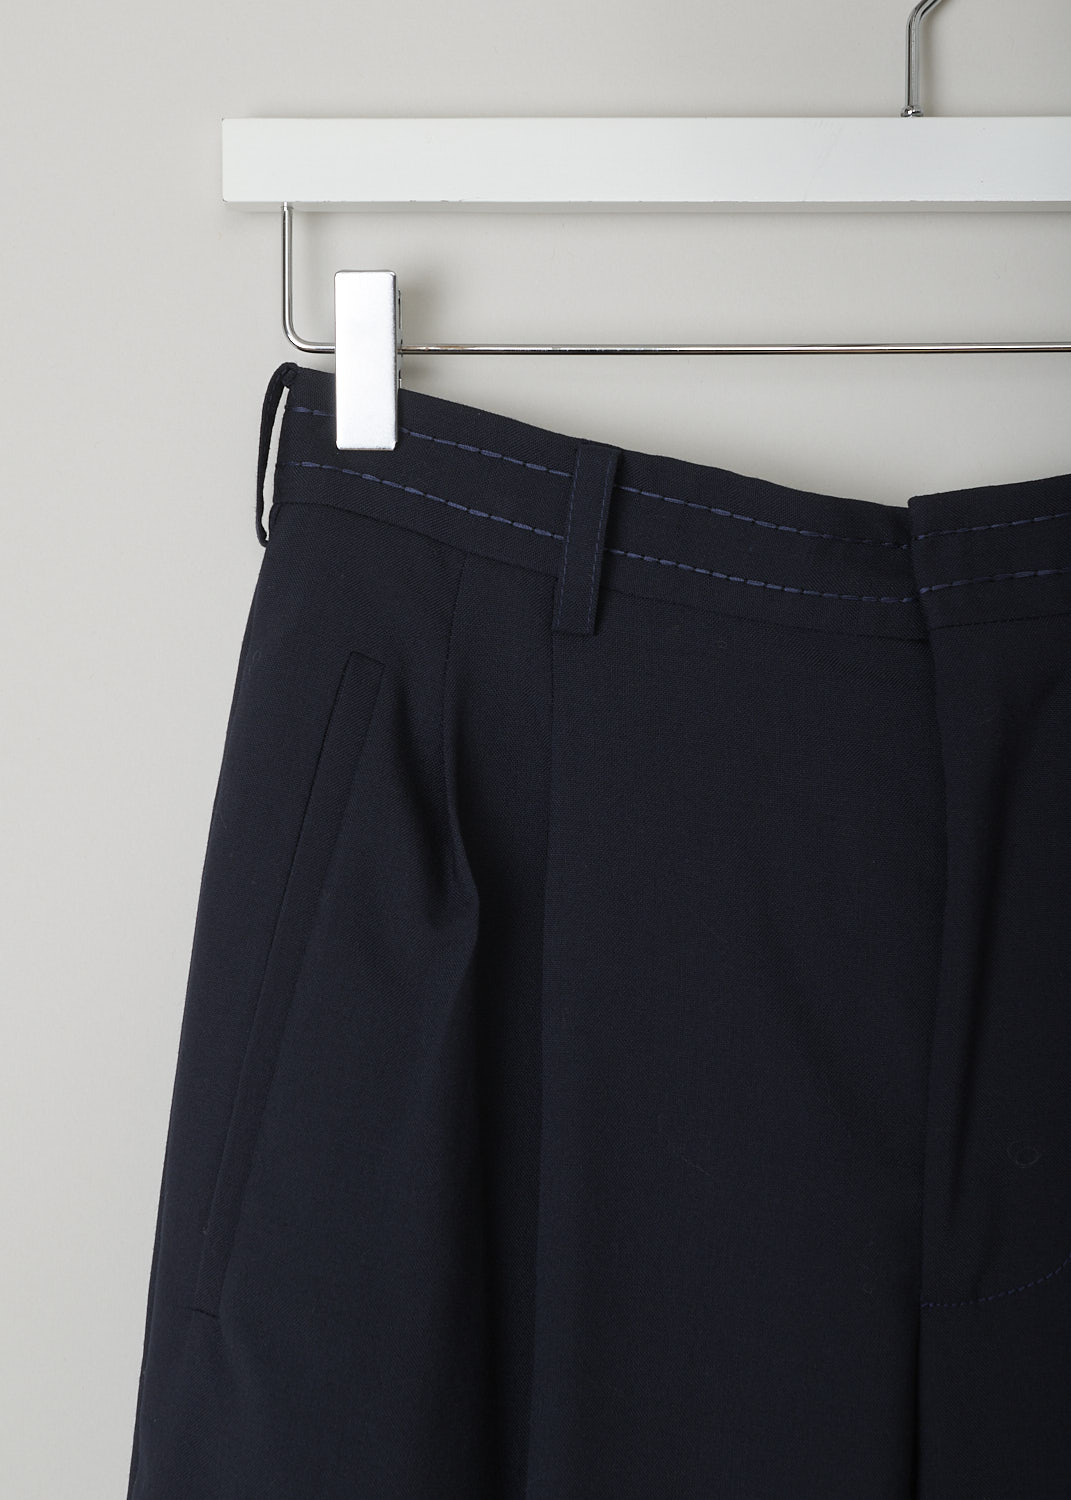 MARNI, DARK NAVY HIGH-WAISTED PANTS, PAMA0385U2_TW839_00B99, Blue, Detail, These dark navy high-waisted pants have a waistband with belt loops. In the front, the brand's logo patch is attached on the waistband.
The pants has slanted welt pockets. Centre pleats run along the length of the wide pants legs. In the back, these pants have two welt pockets: one with flap and button. 
  
